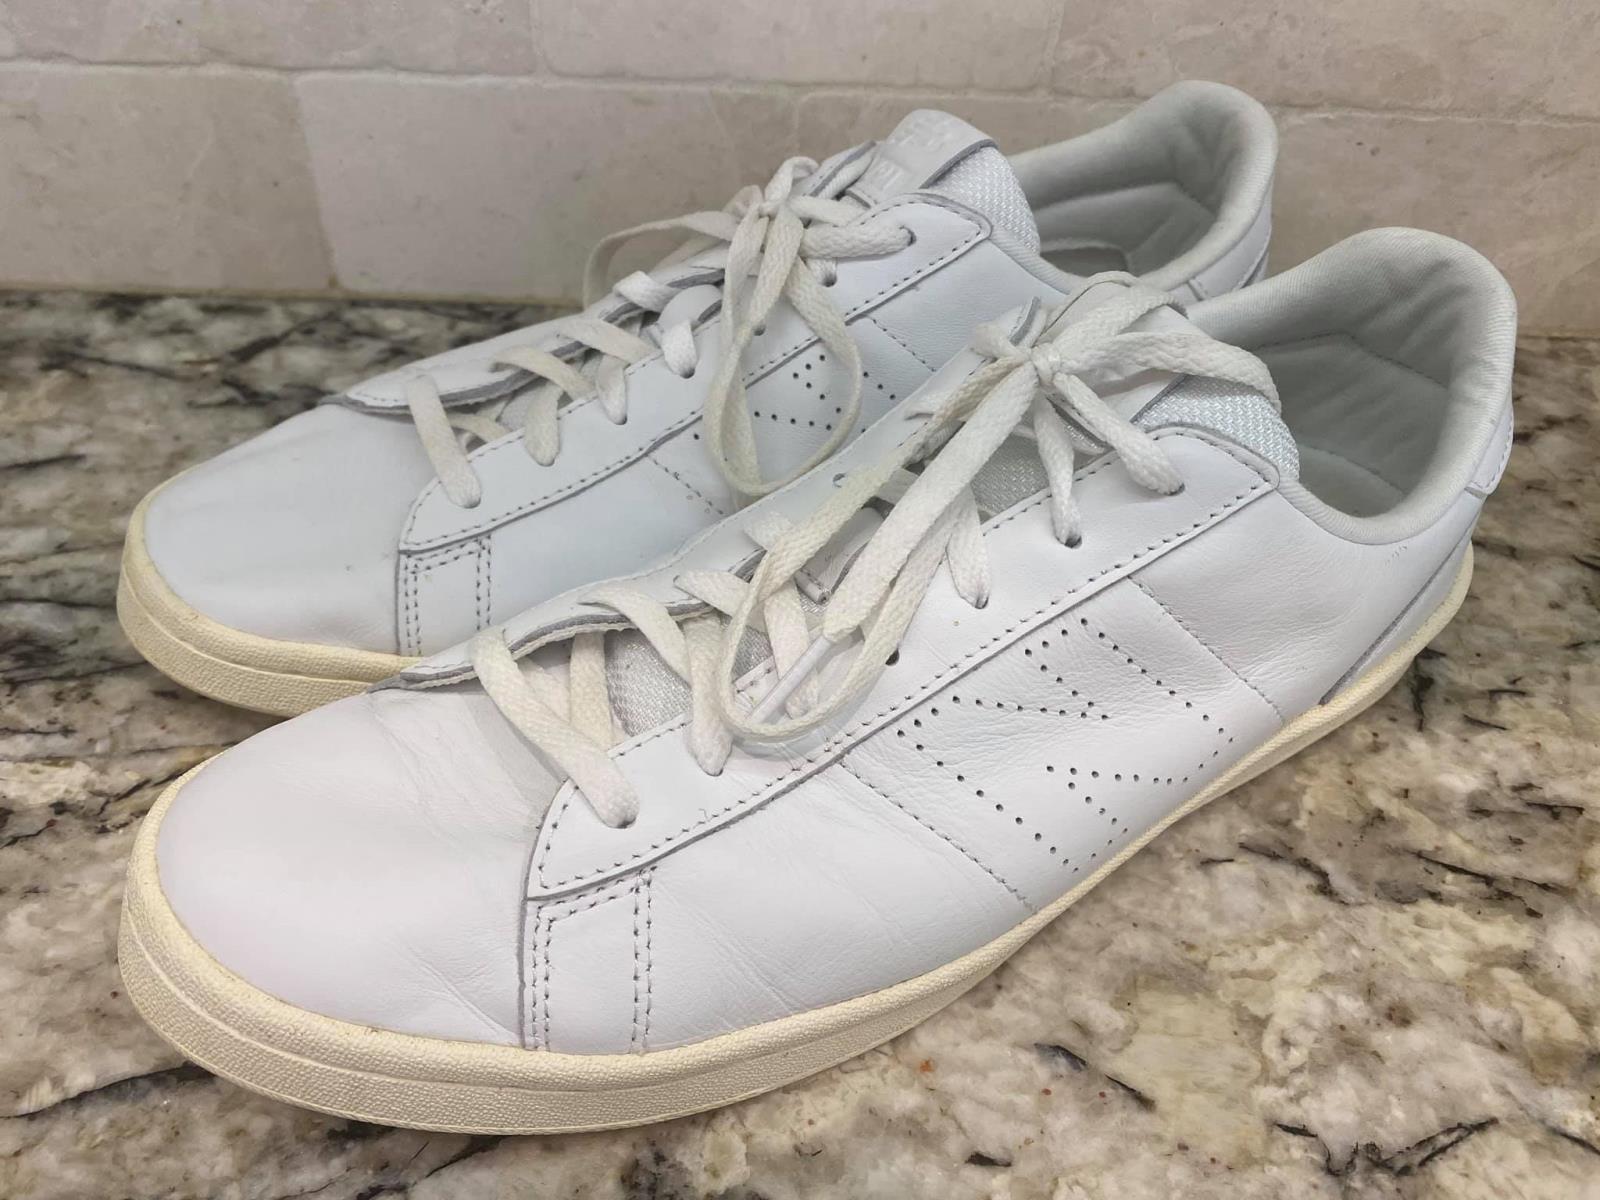 New Balance® for J.Crew 791 leather sneakers white 10 E8592 worn once ...